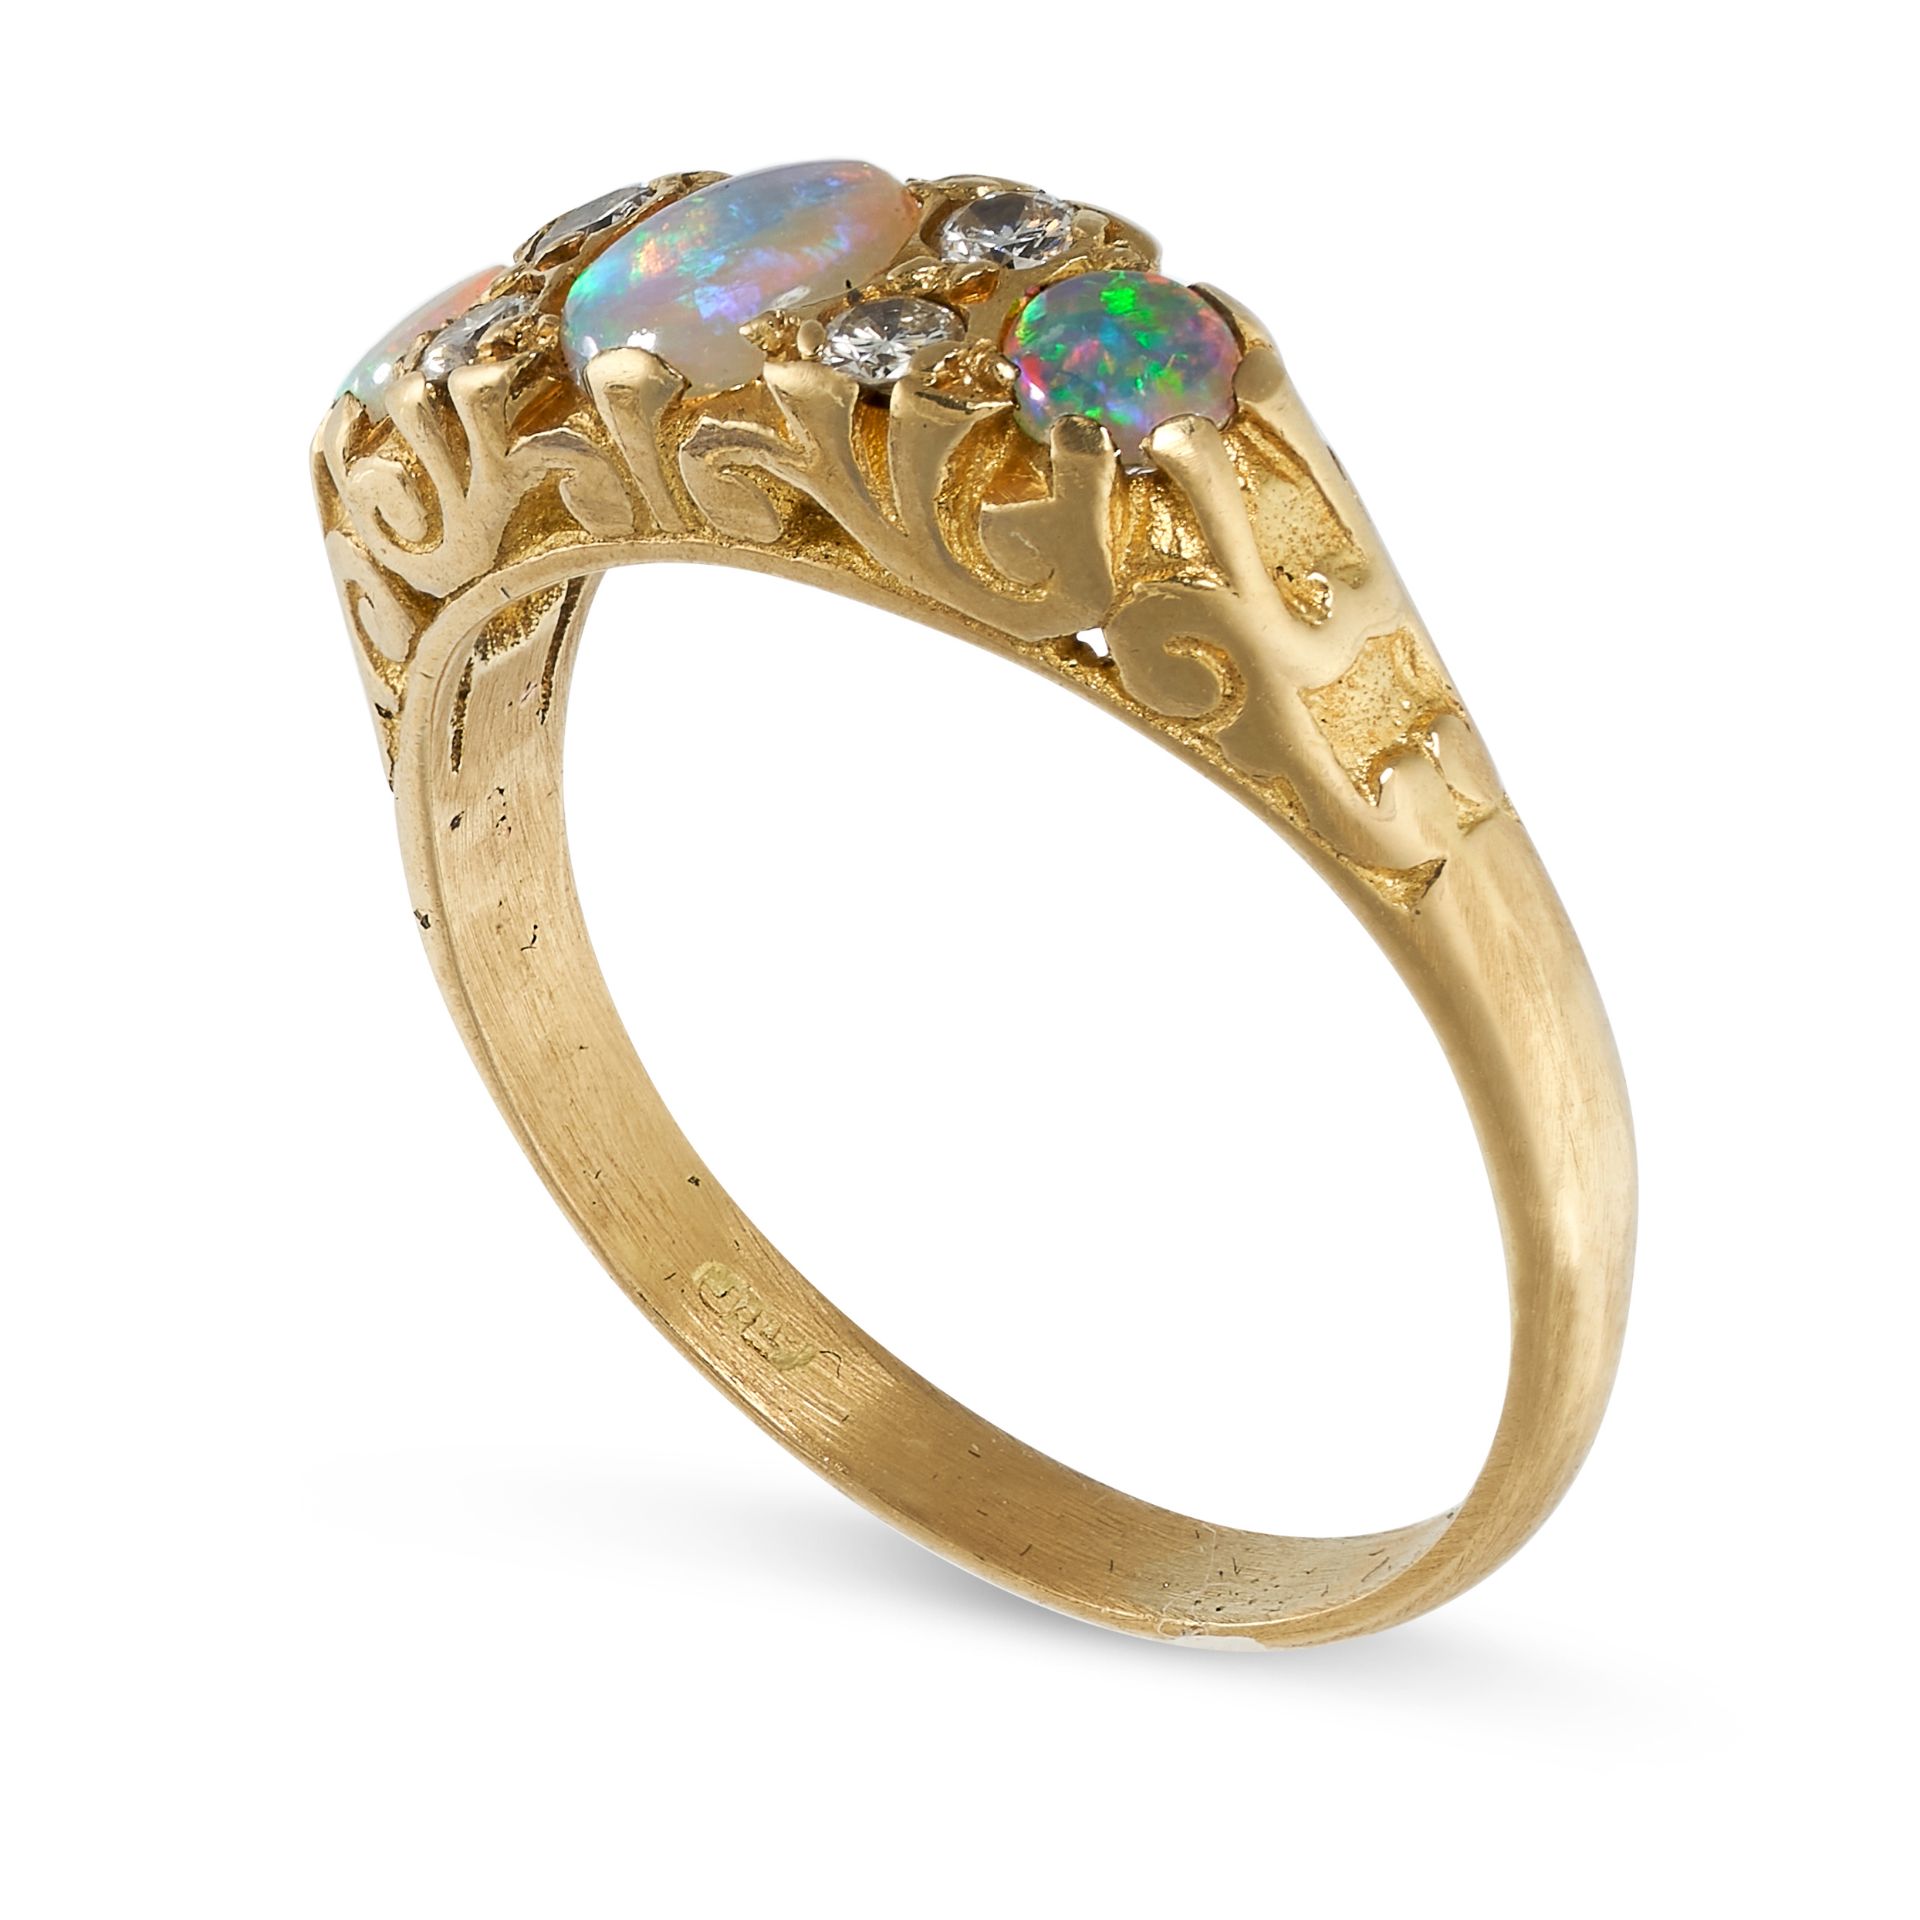 AN OPAL AND DIAMOND RING in 18ct yellow gold, set with a trio of graduated round cabochon opals - Image 2 of 2